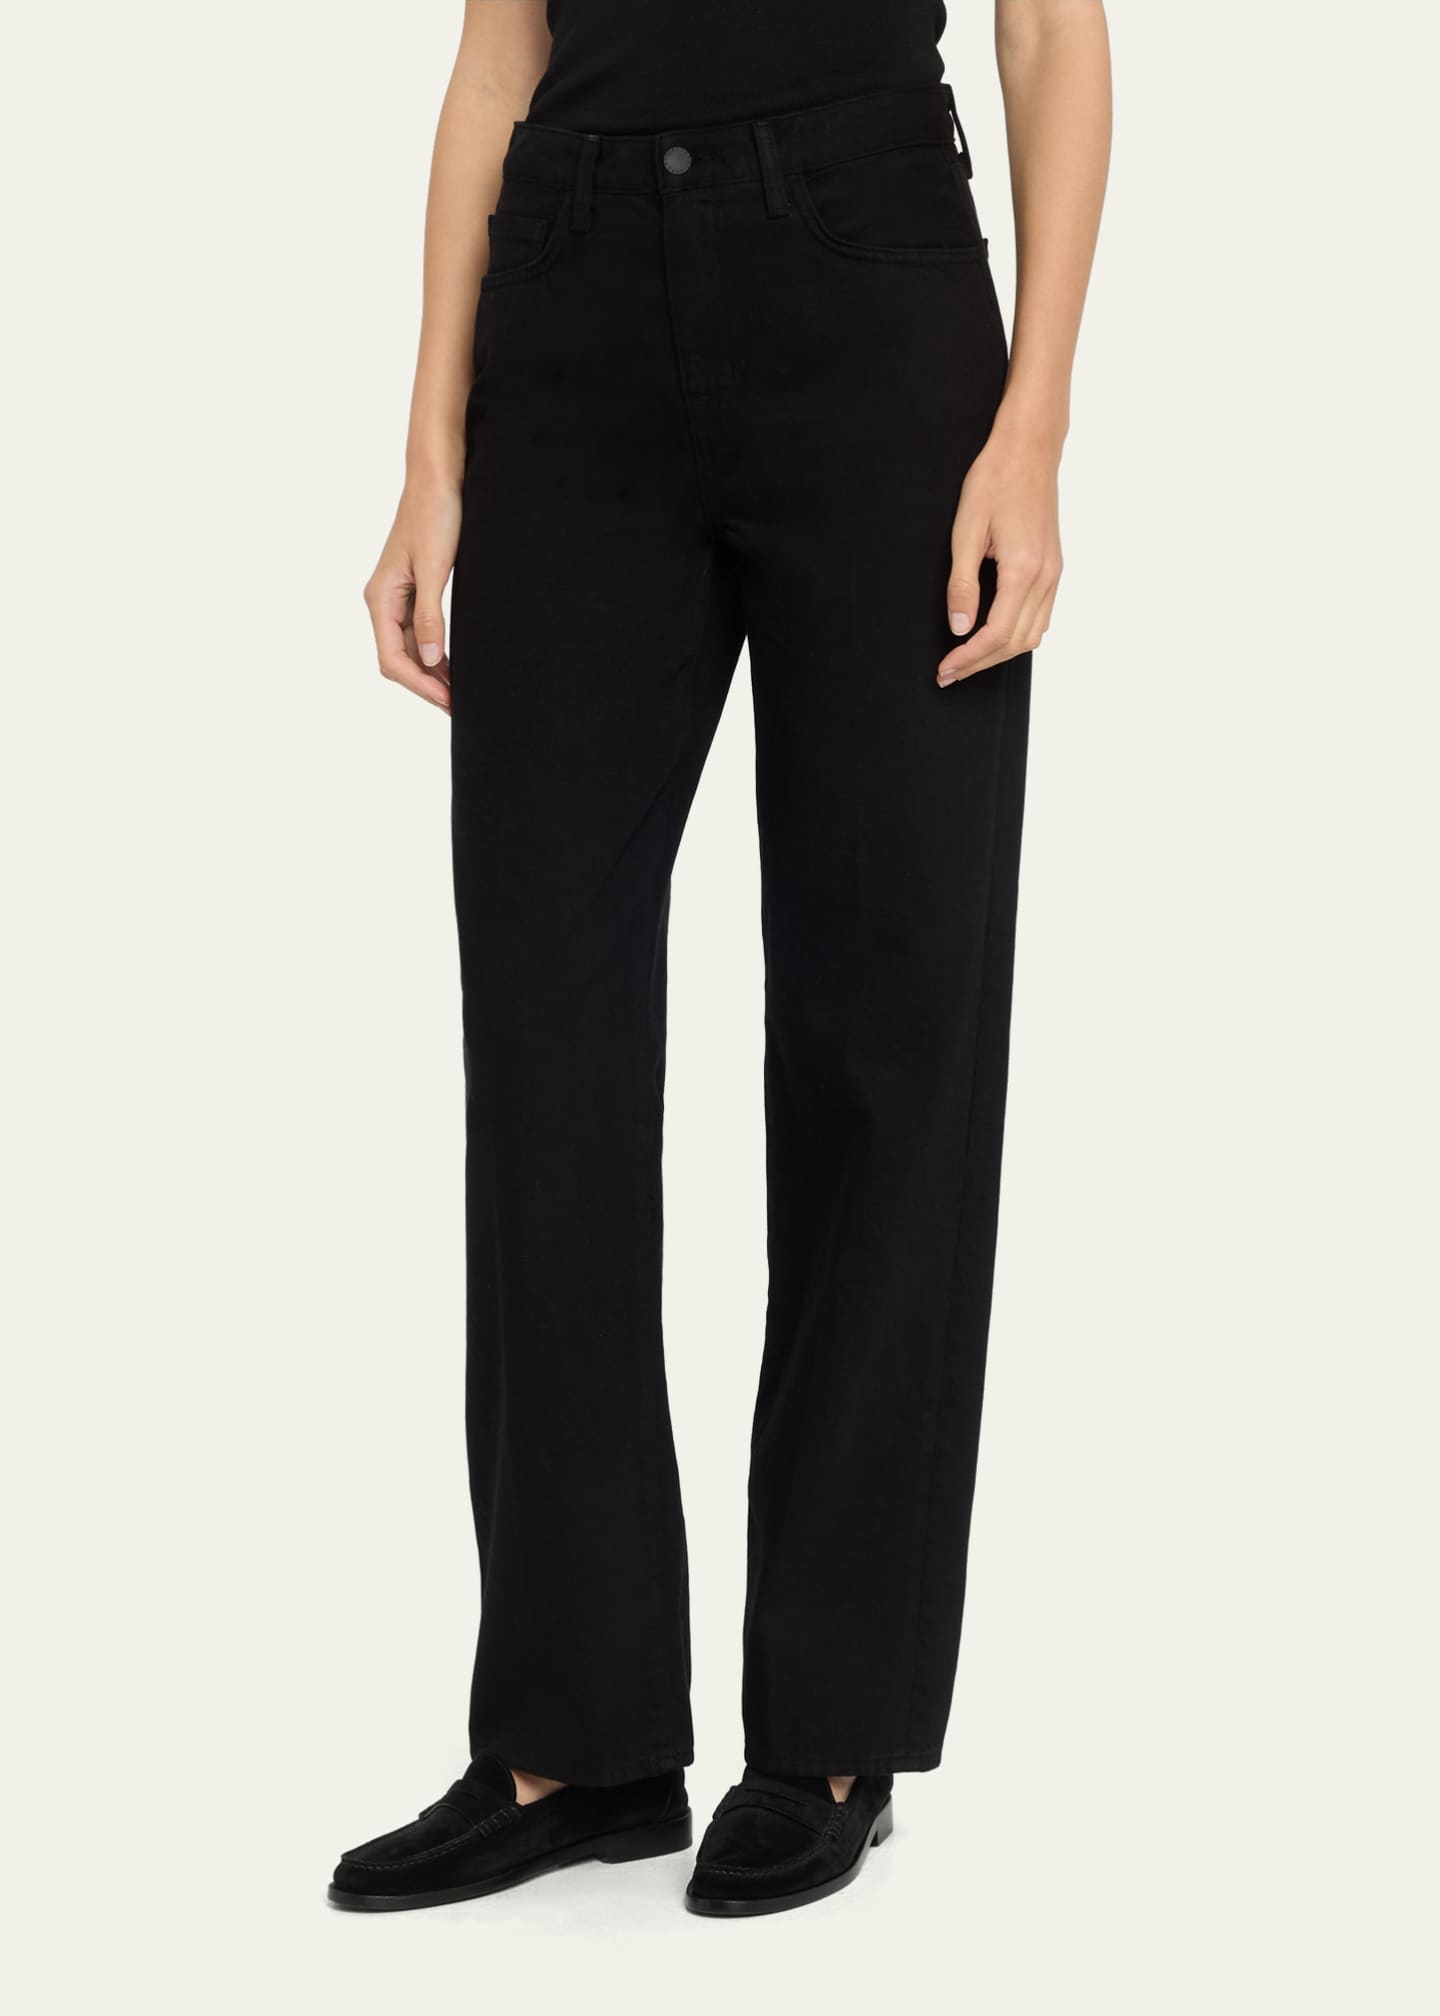 L'Agence Jones Ultra High Rise Stovepipe Jeans - Bergdorf Goodman